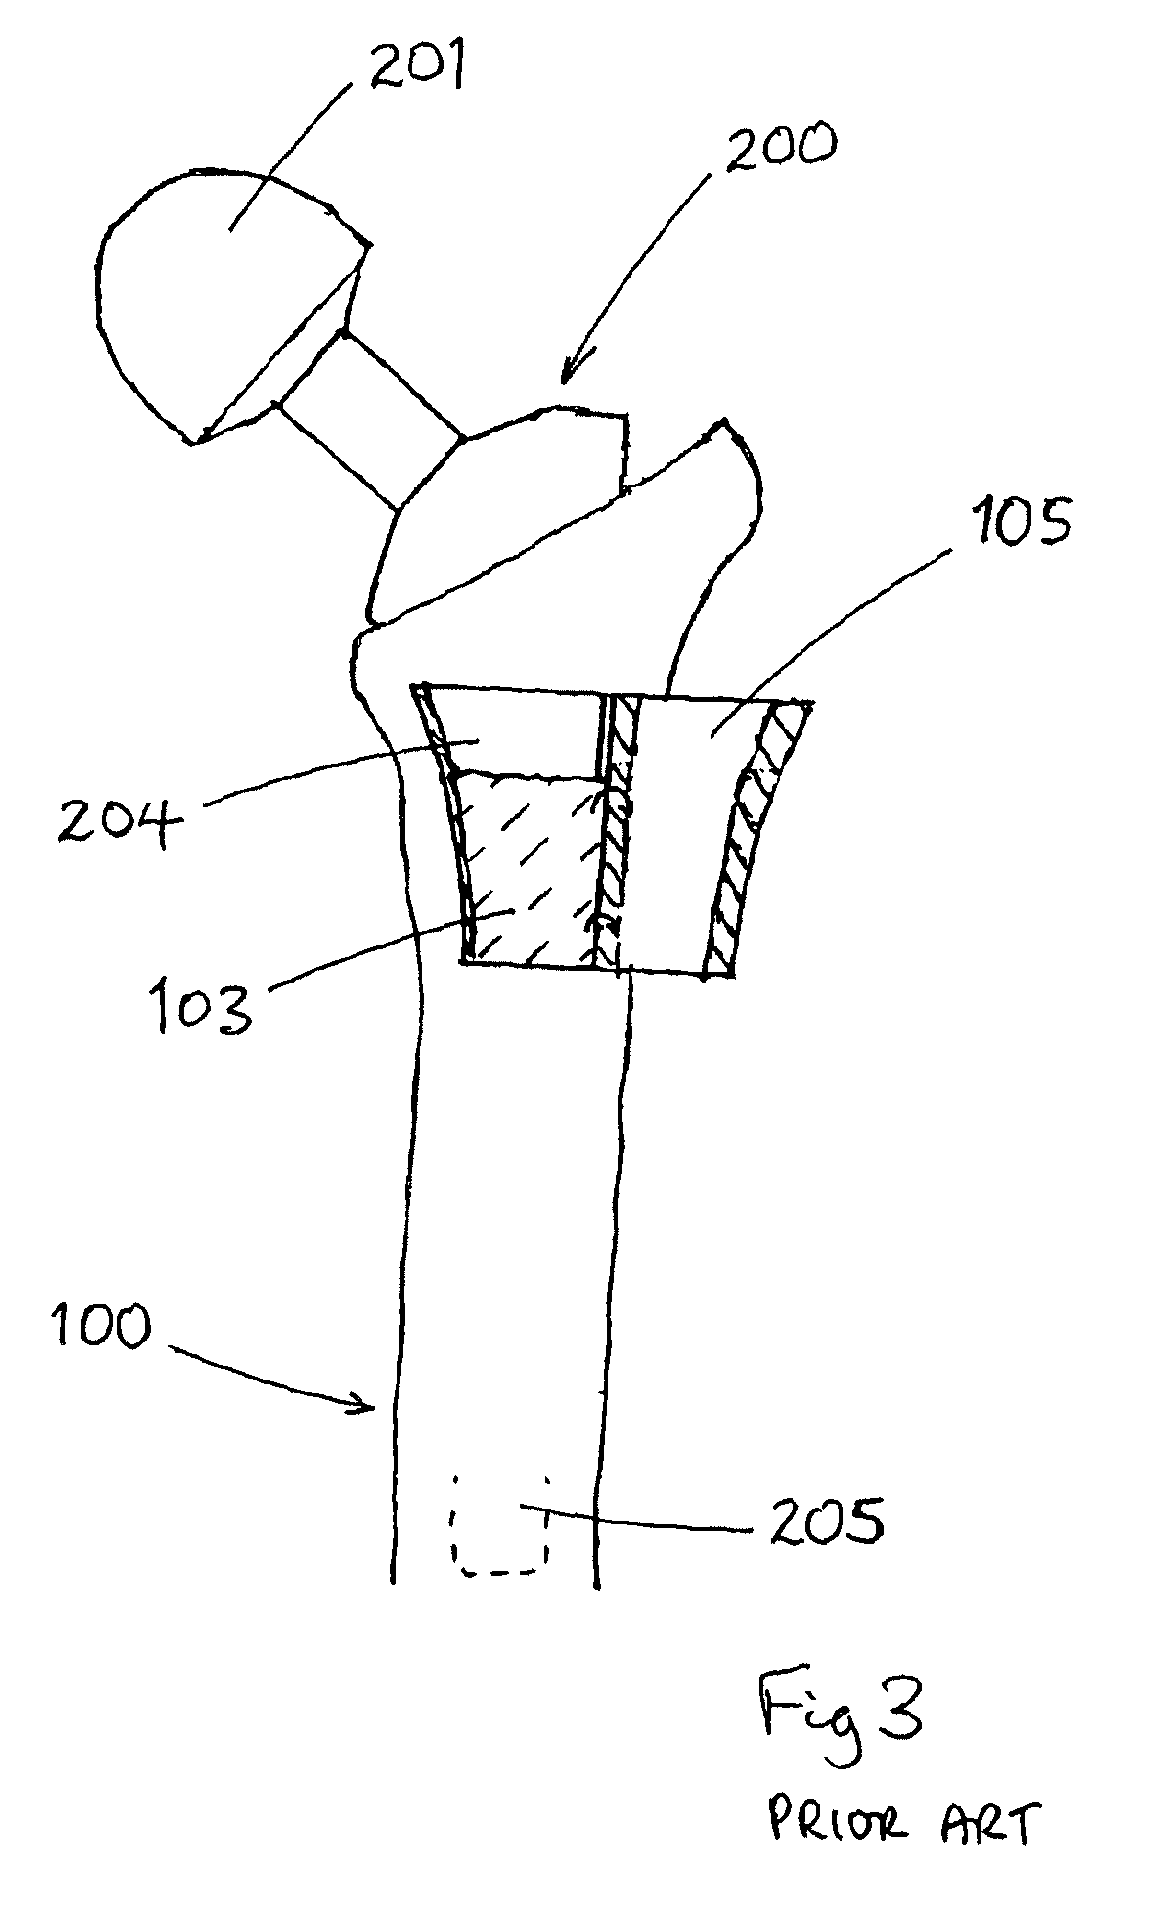 Femoral implant revision tool